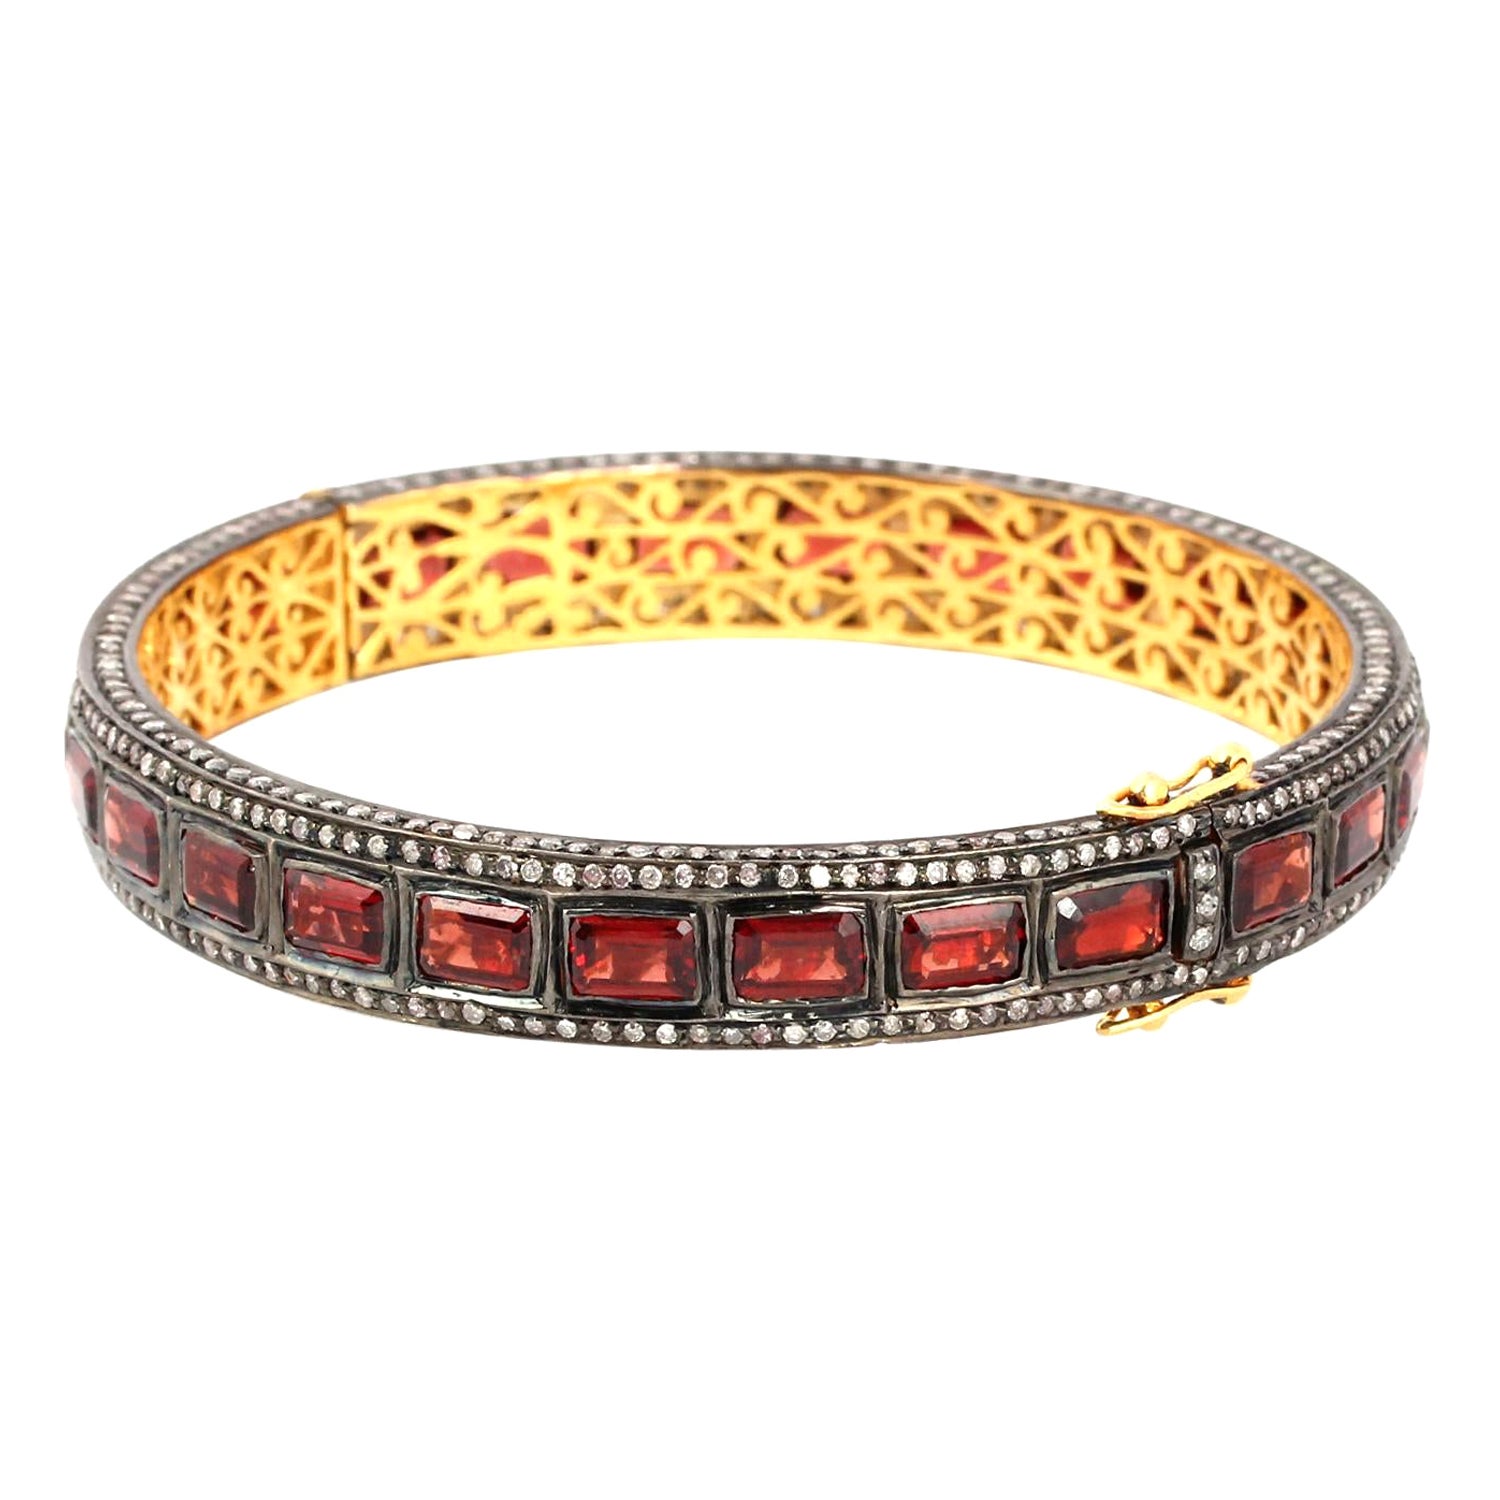 Designer Bracelet With Red Garnet Octogen Stone Surrounded by Pave Diamonds For Sale